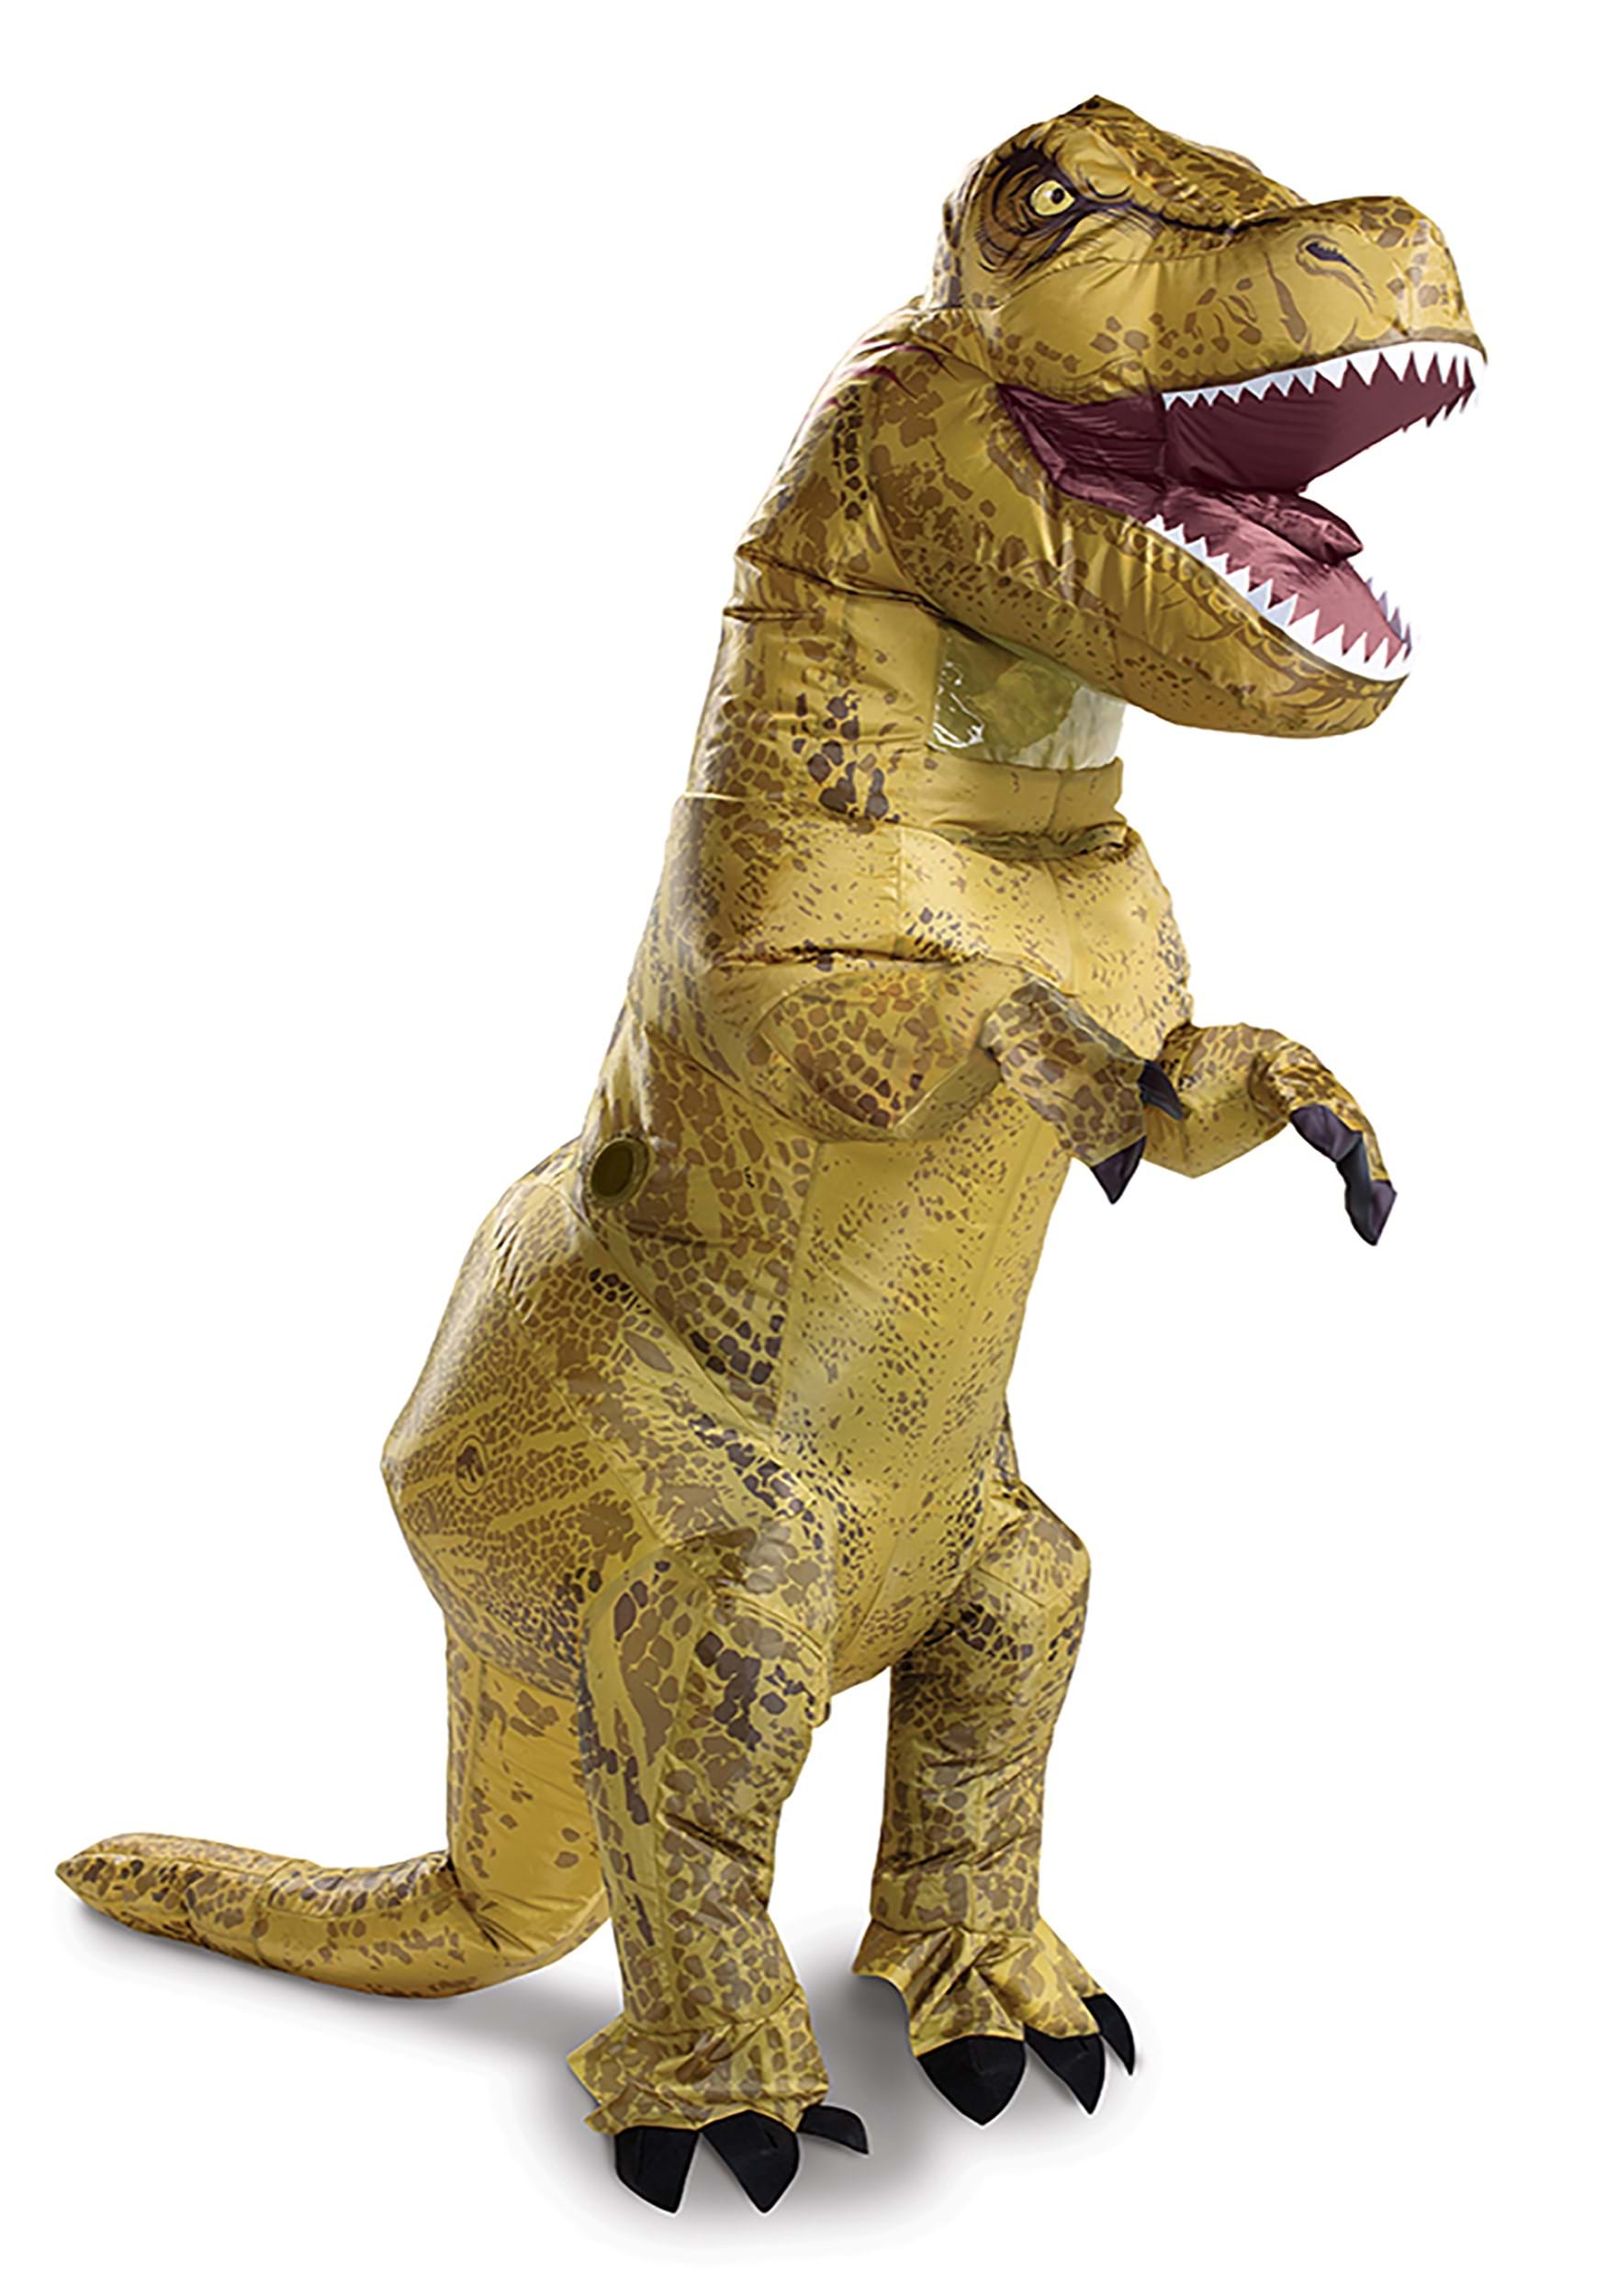 Image of Inflatable Adult Jurassic World T-Rex Costume ID DI119809AD-ST